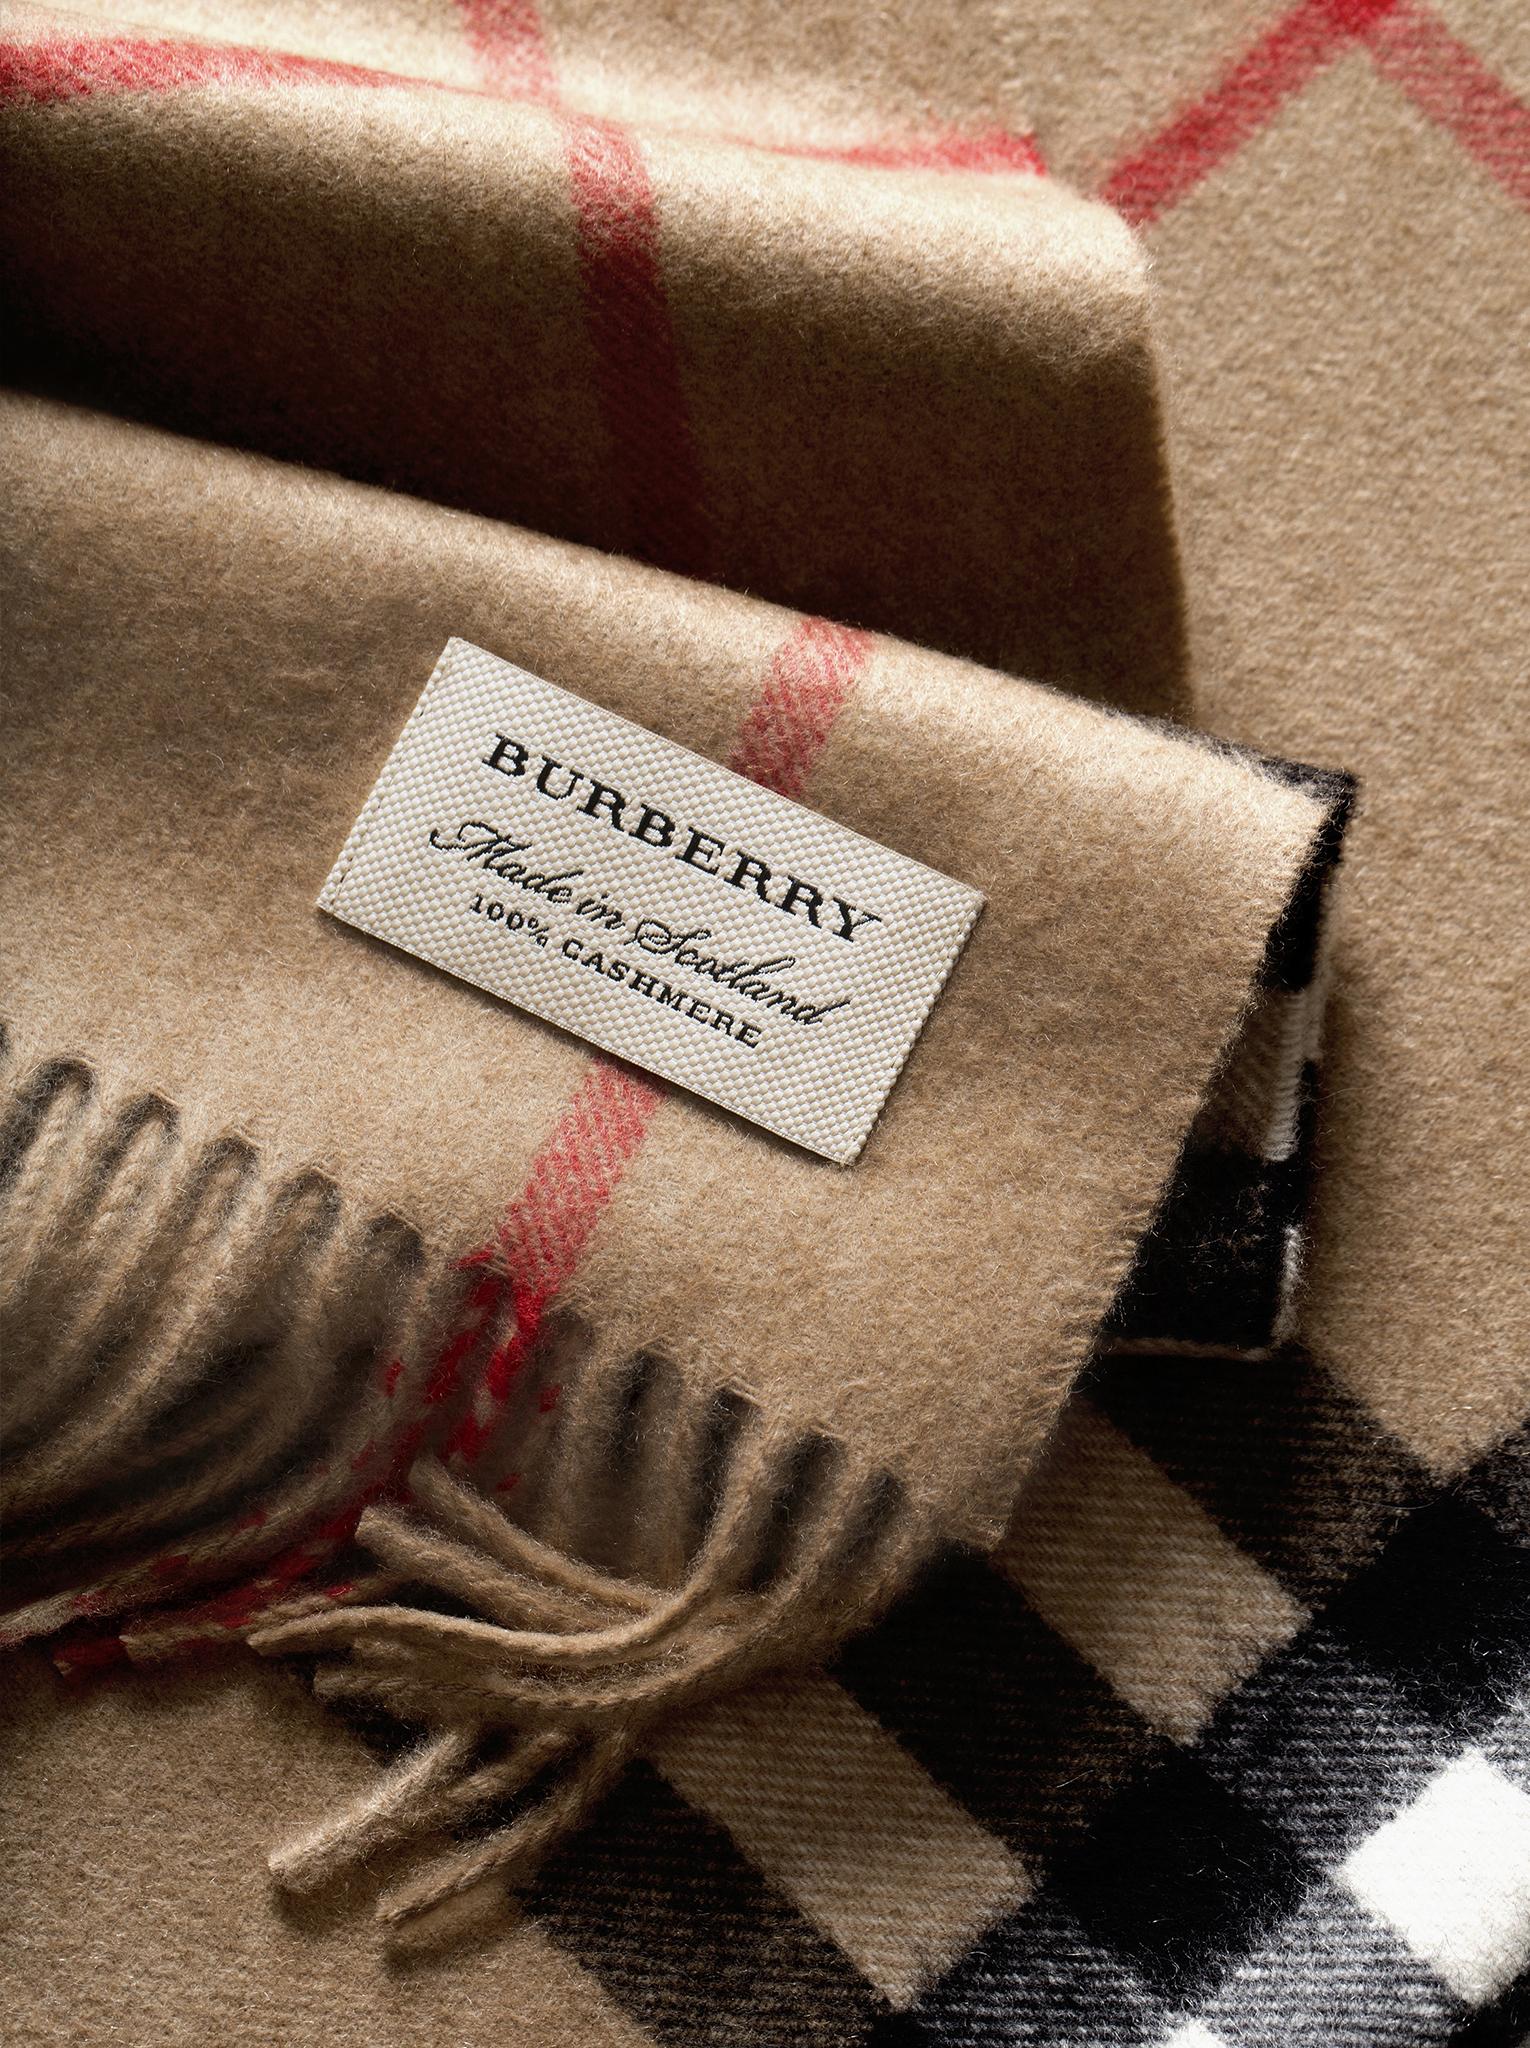 How To Spot A Fake Burberry Scarf: Ways To Tell Real Scarves |  